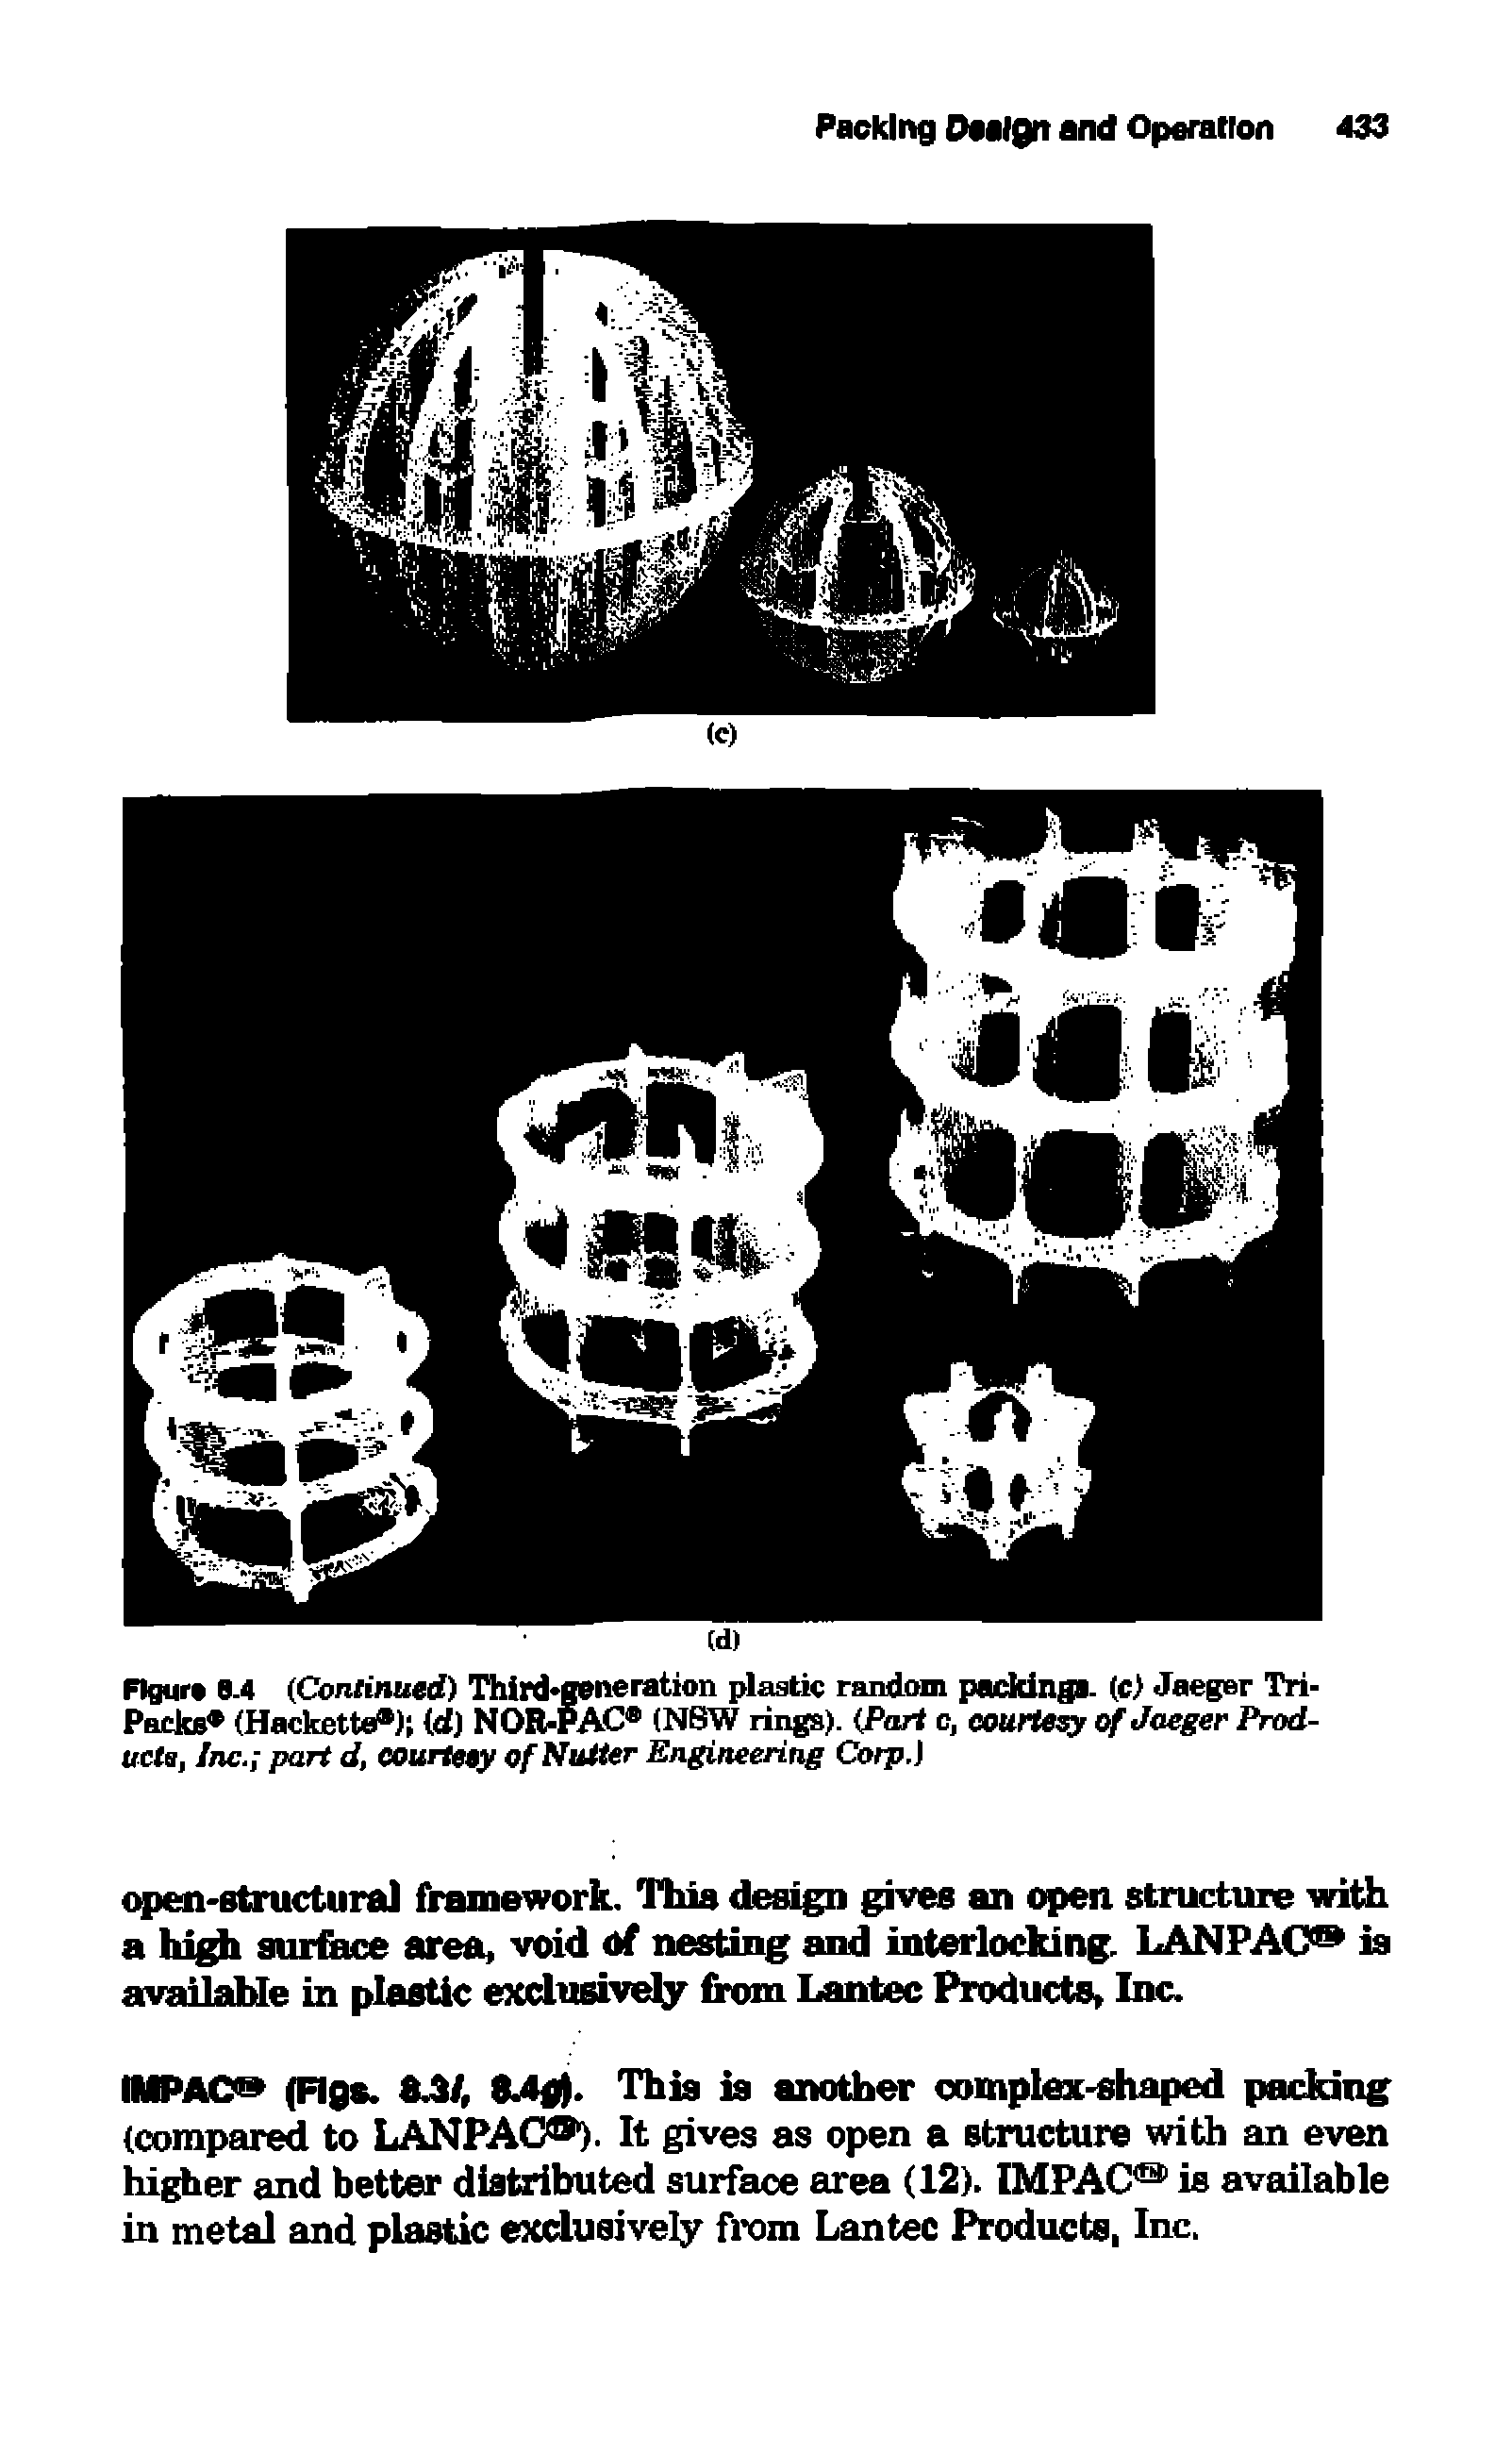 Figure 8.4 (Continued) Third-sene ration plastic random packings. (c) Jaeger Tri-Packs (Hackette ) (d) NOR-PAC (NSW rings). (Part c, courtesy of Jaeger Products, Inc. part d, courtesy of Nutter Engineering Corp.l...